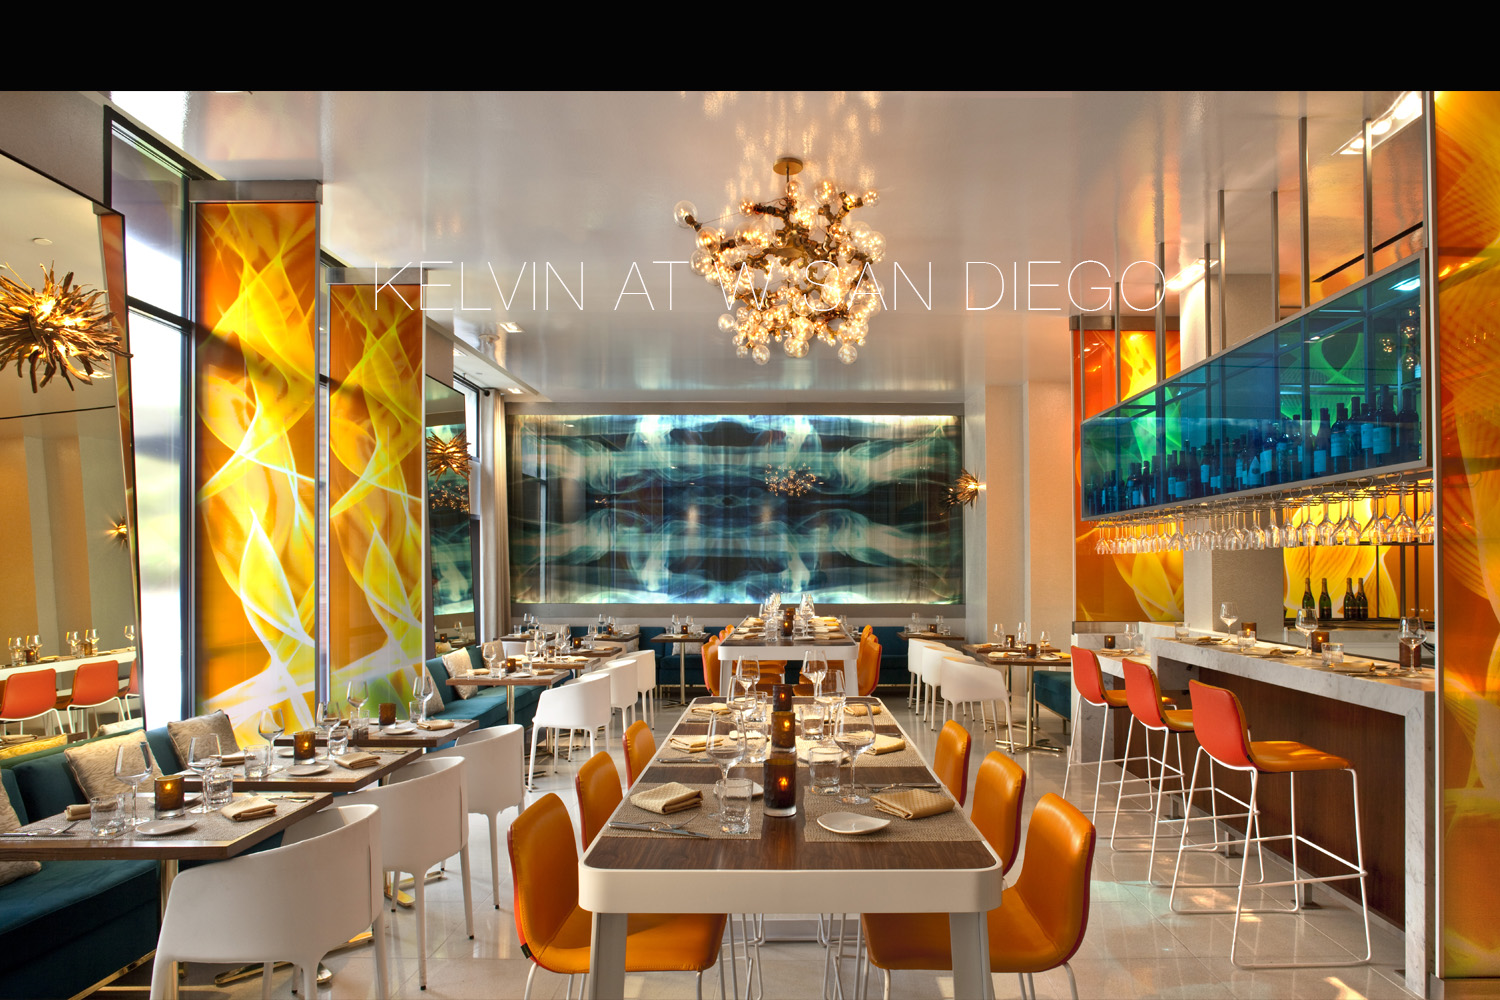 Kelvin at W Hotel San Diego by Mister Important Design